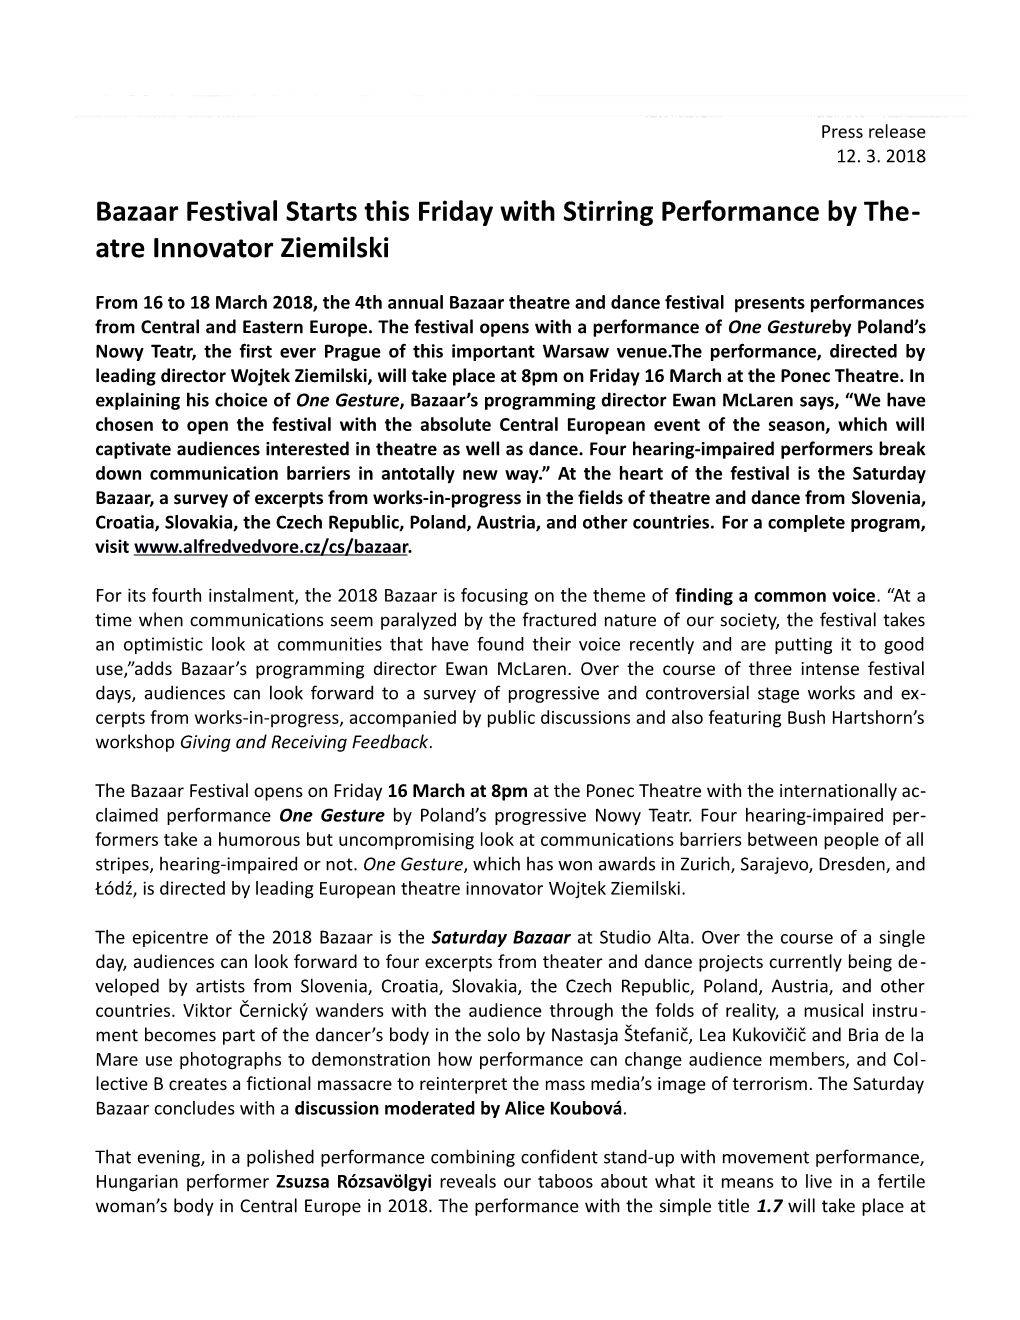 Bazaar Festival Starts This Friday with Stirring Performance by Theatre Innovatorziemilski